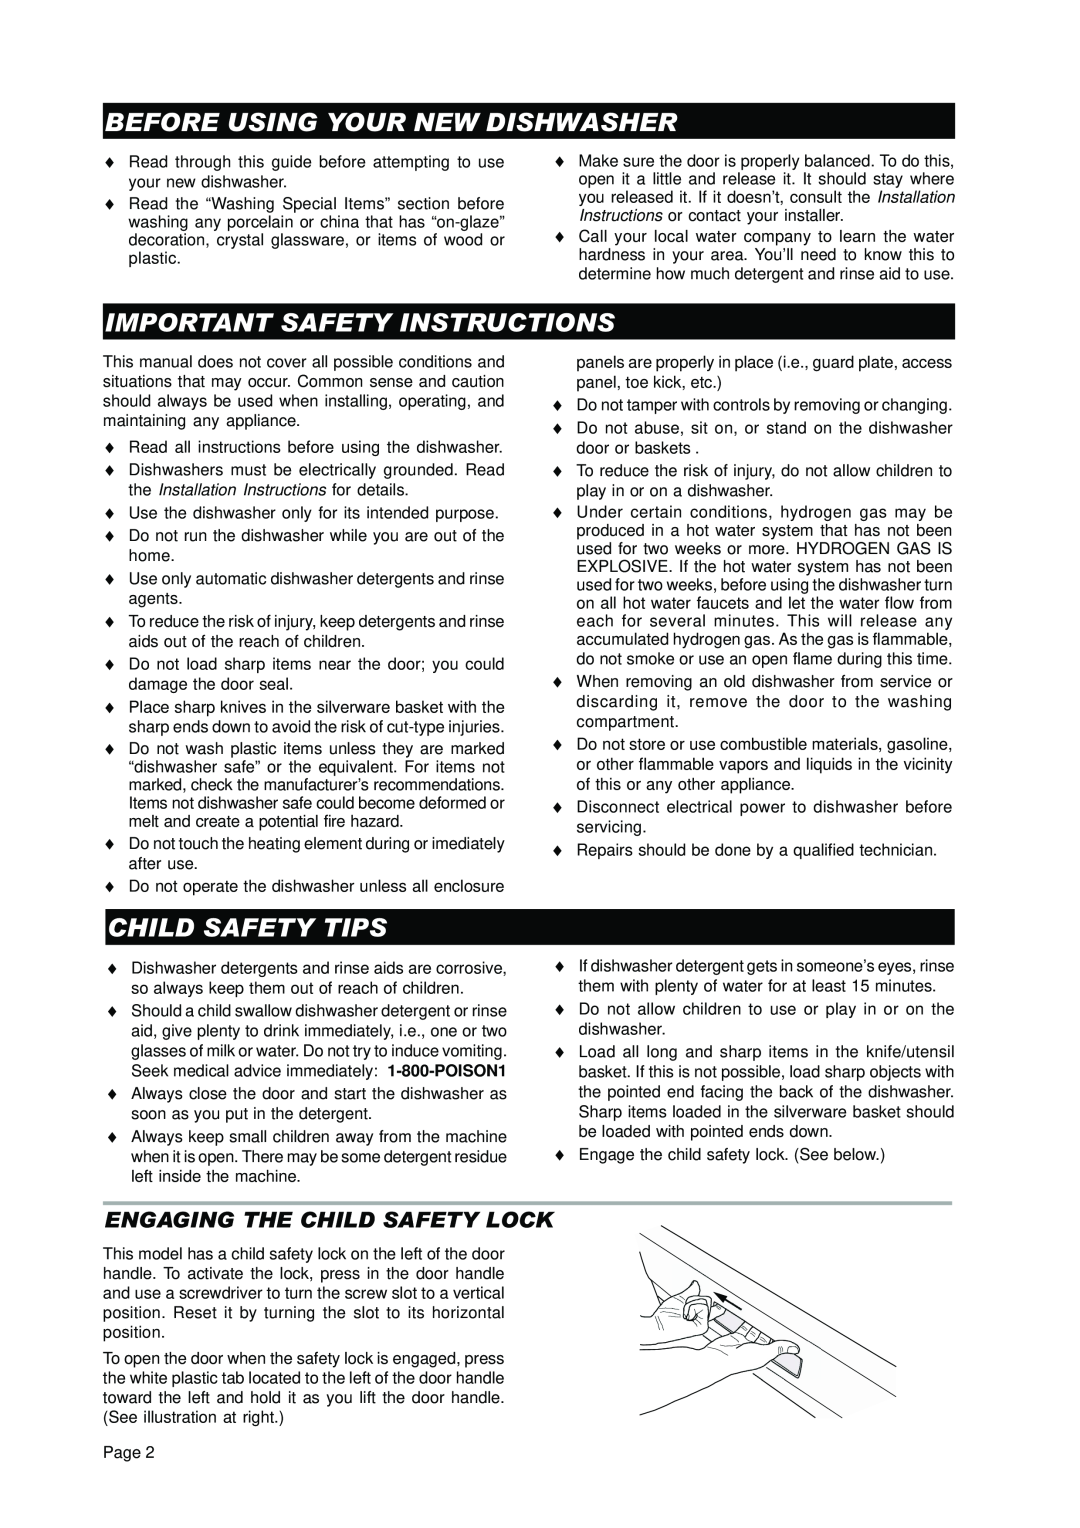 Asko D3250 operating instructions Before Using Your New Dishwasher, Important Safety Instructions, Child Safety Tips 